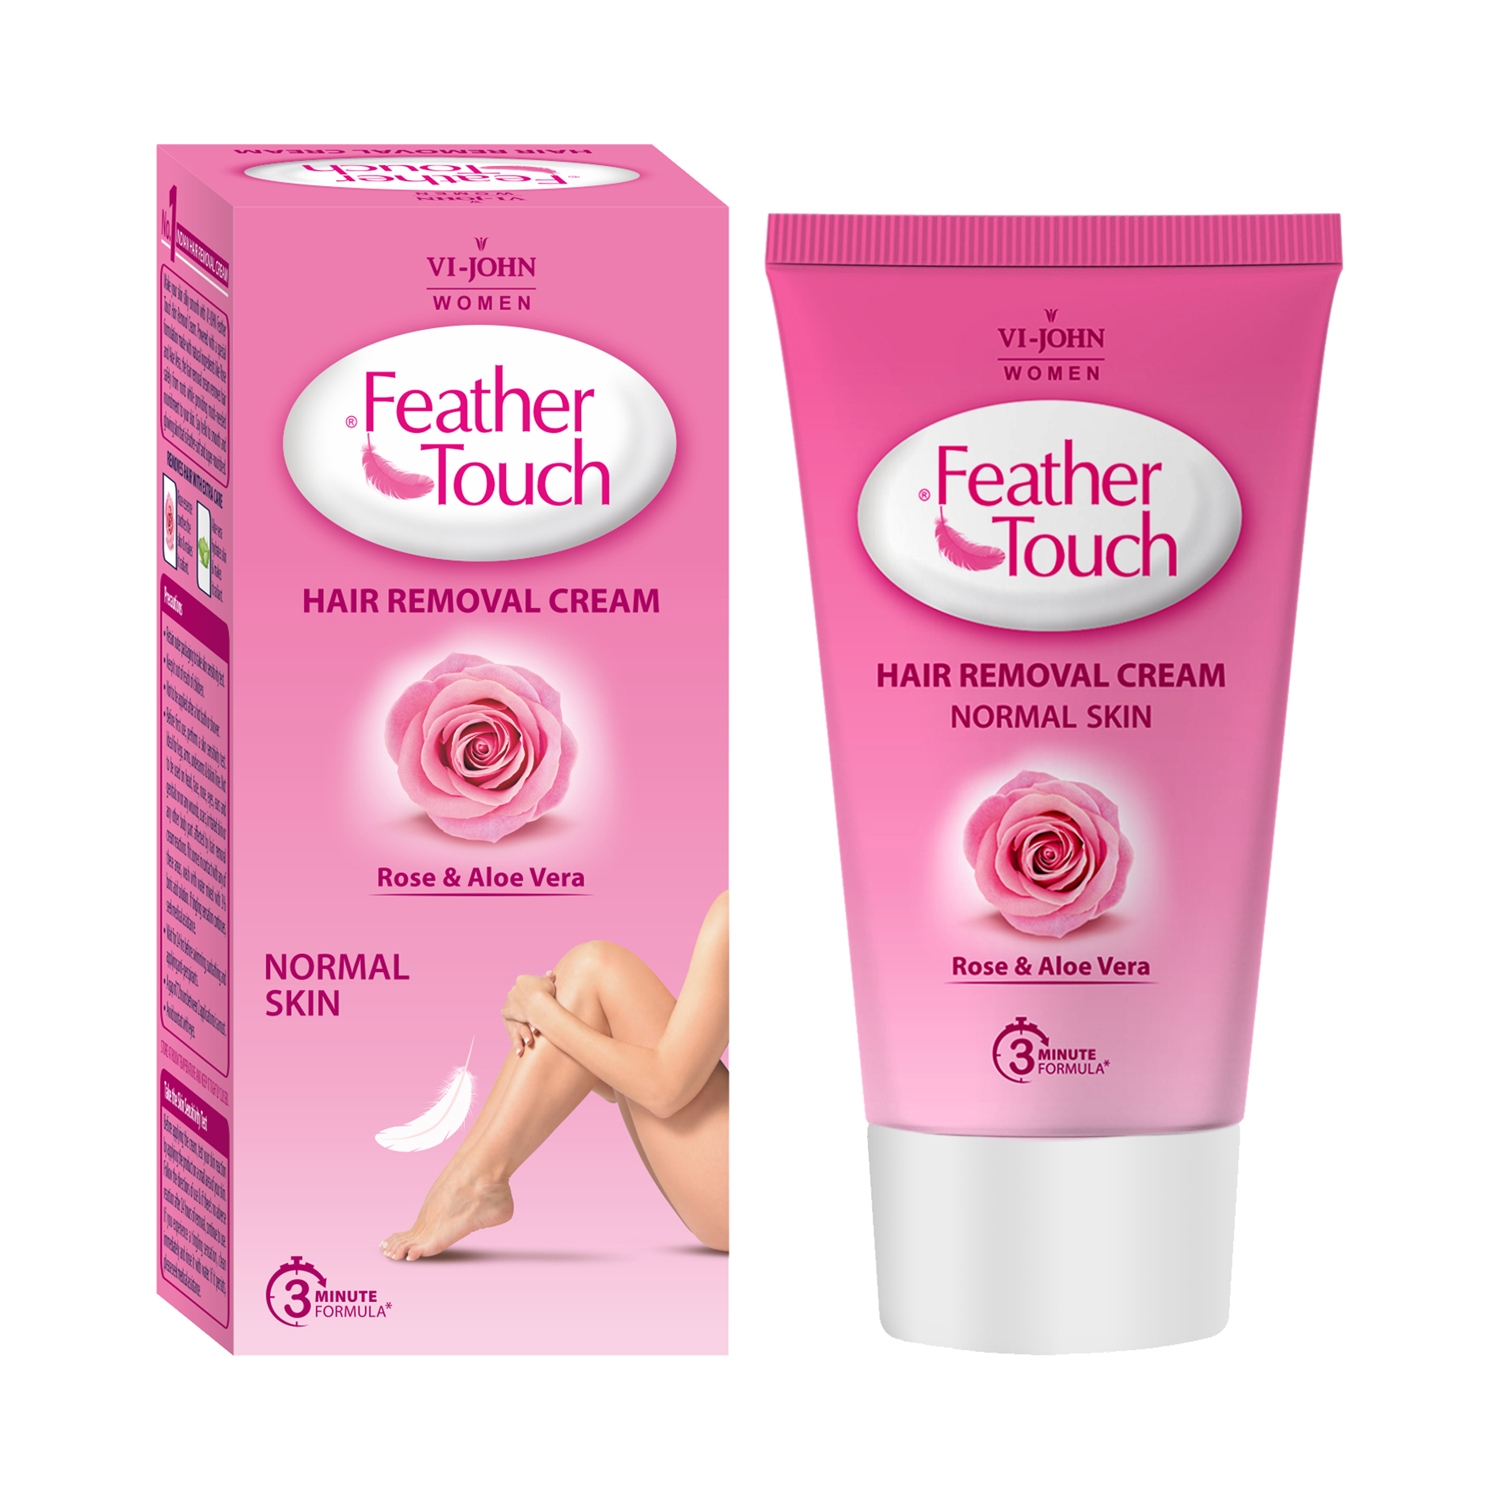 VI-JOHN | VI-JOHN Feather Touch Hair Removal Cream With Rose & Aloe Vera Tube For Normal Skin (40g)